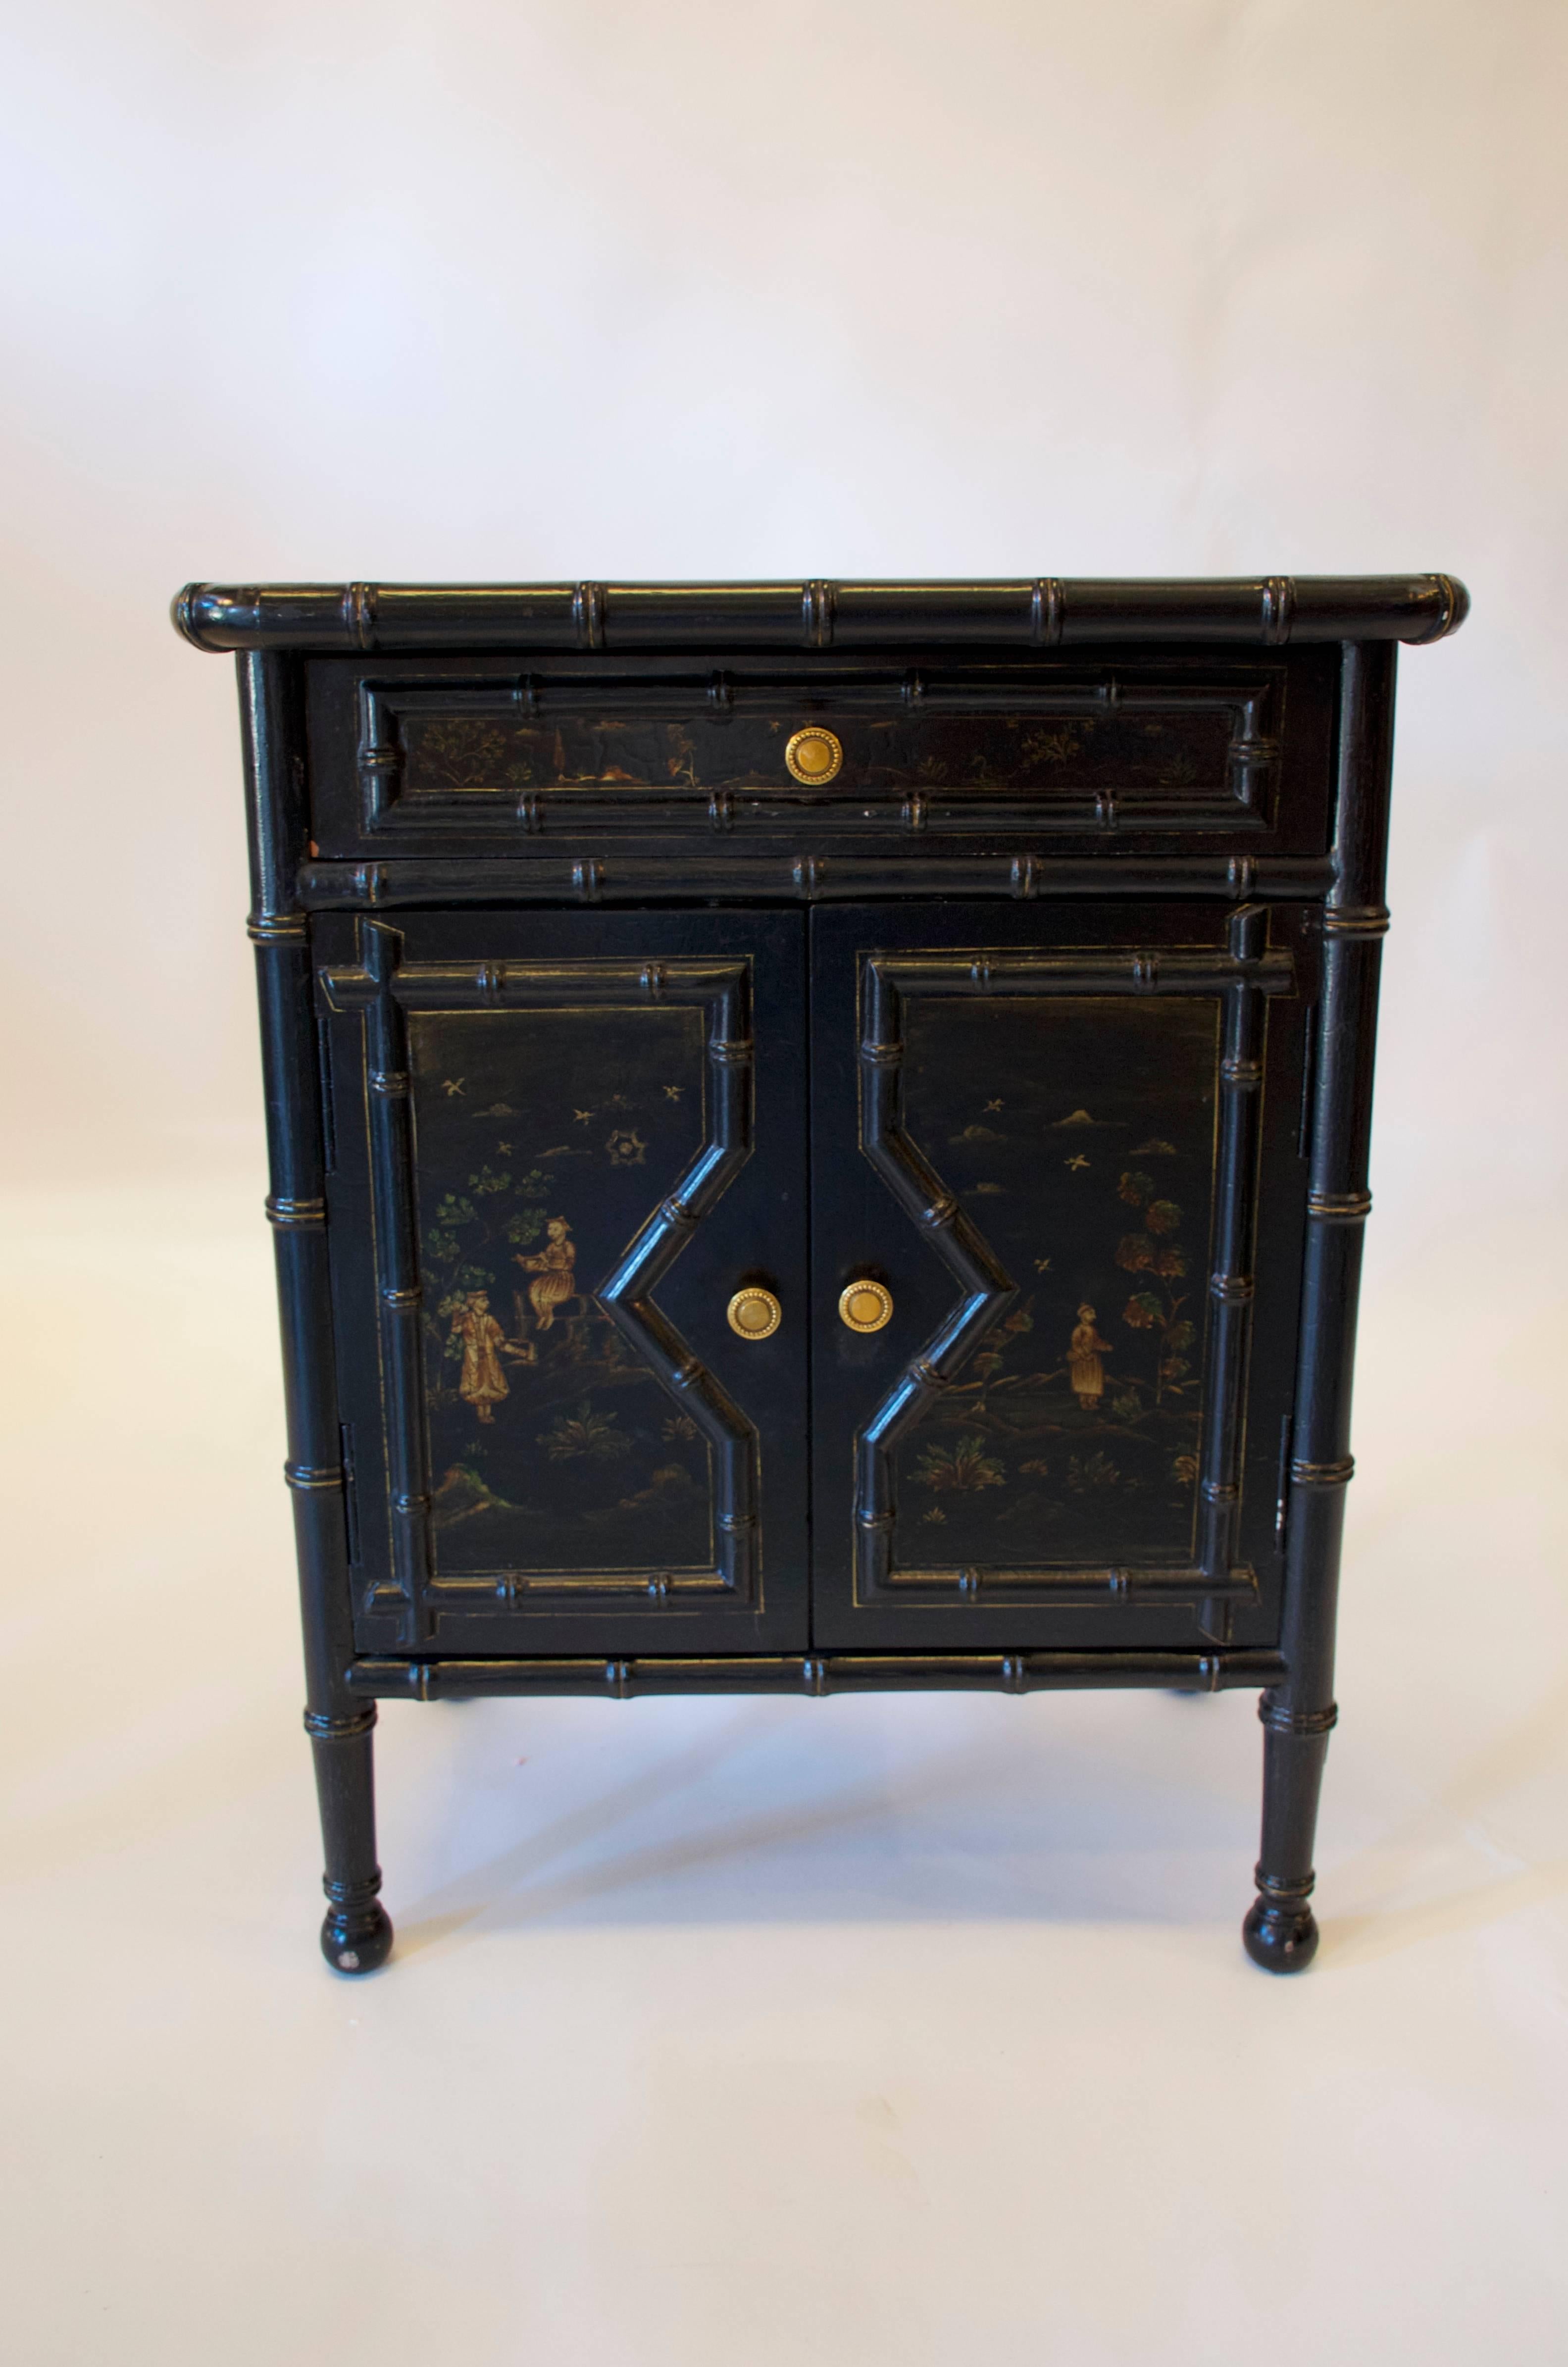 Perfect for bedside tables, gorgeous chinoiserie details.